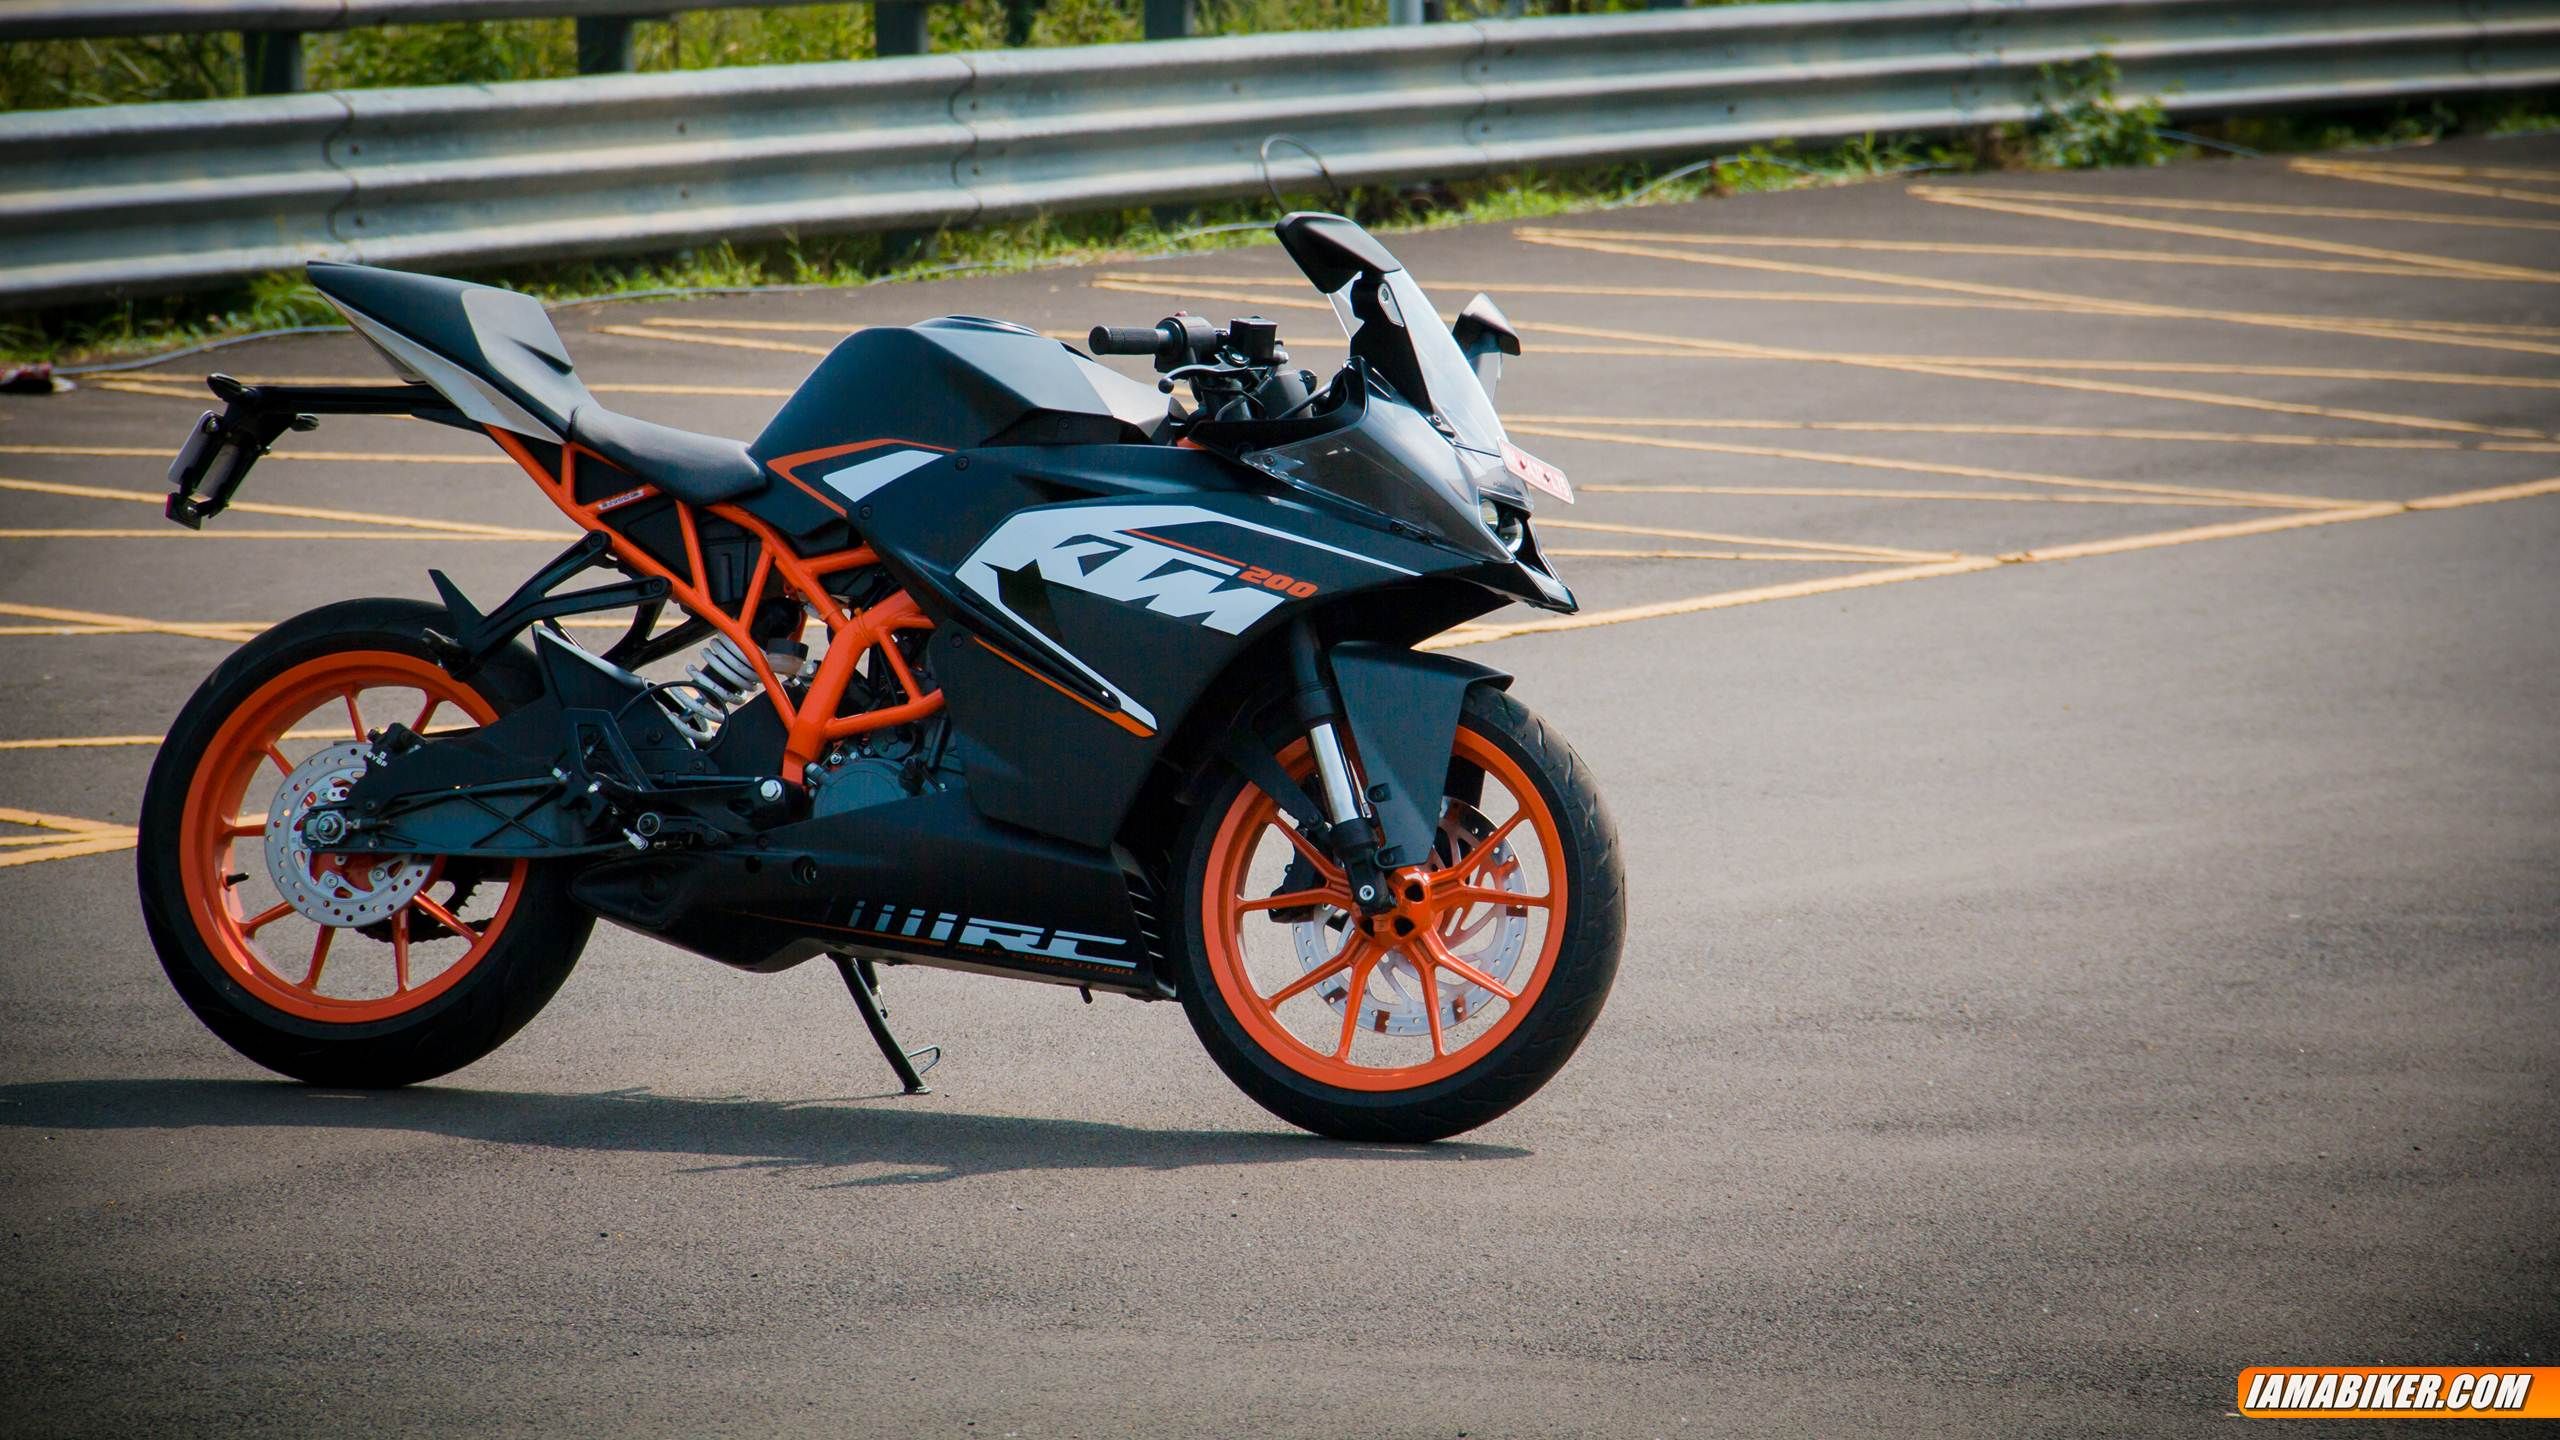 Ktm Rc200 HD Wallpaper Adorable In Rc